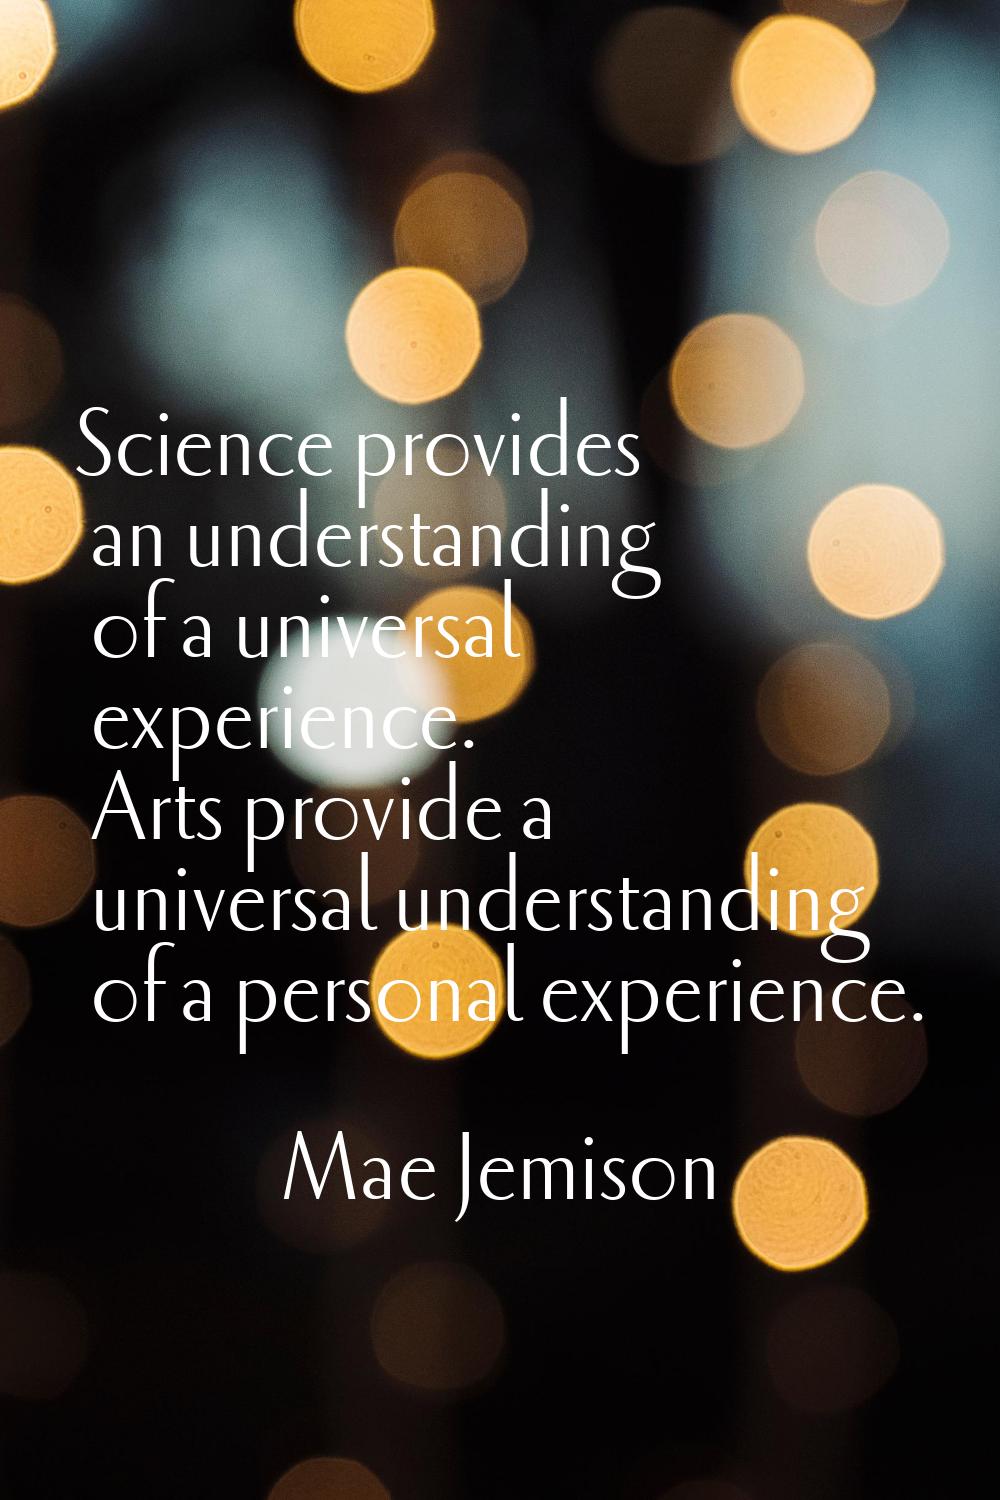 Science provides an understanding of a universal experience. Arts provide a universal understanding